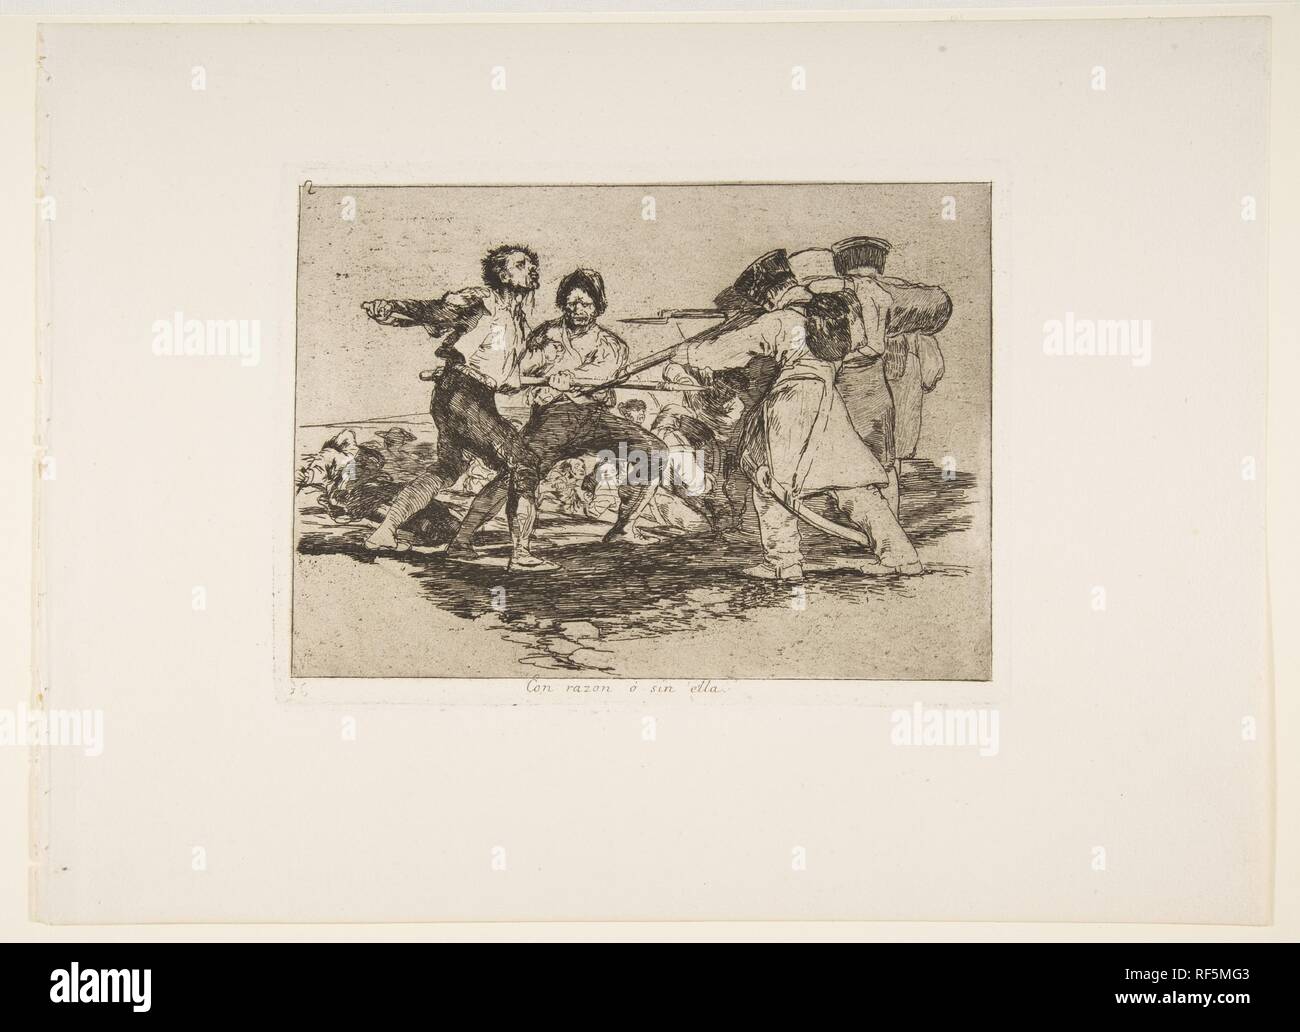 Plate 2 from 'The Disasters of War' (Los Desastres de la Guerra): 'Rightly or wrongly.' (Con razon ó sin ella.). Artist: Goya (Francisco de Goya y Lucientes) (Spanish, Fuendetodos 1746-1828 Bordeaux). Dimensions: Plate: 6 in. × 8 1/16 in. (15.3 × 20.5 cm)  Sheet: 9 15/16 × 13 1/2 in. (25.2 × 34.3 cm). Series/Portfolio: The Disasters of War. Date: 1810 (published 1863). Museum: Metropolitan Museum of Art, New York, USA. Stock Photo